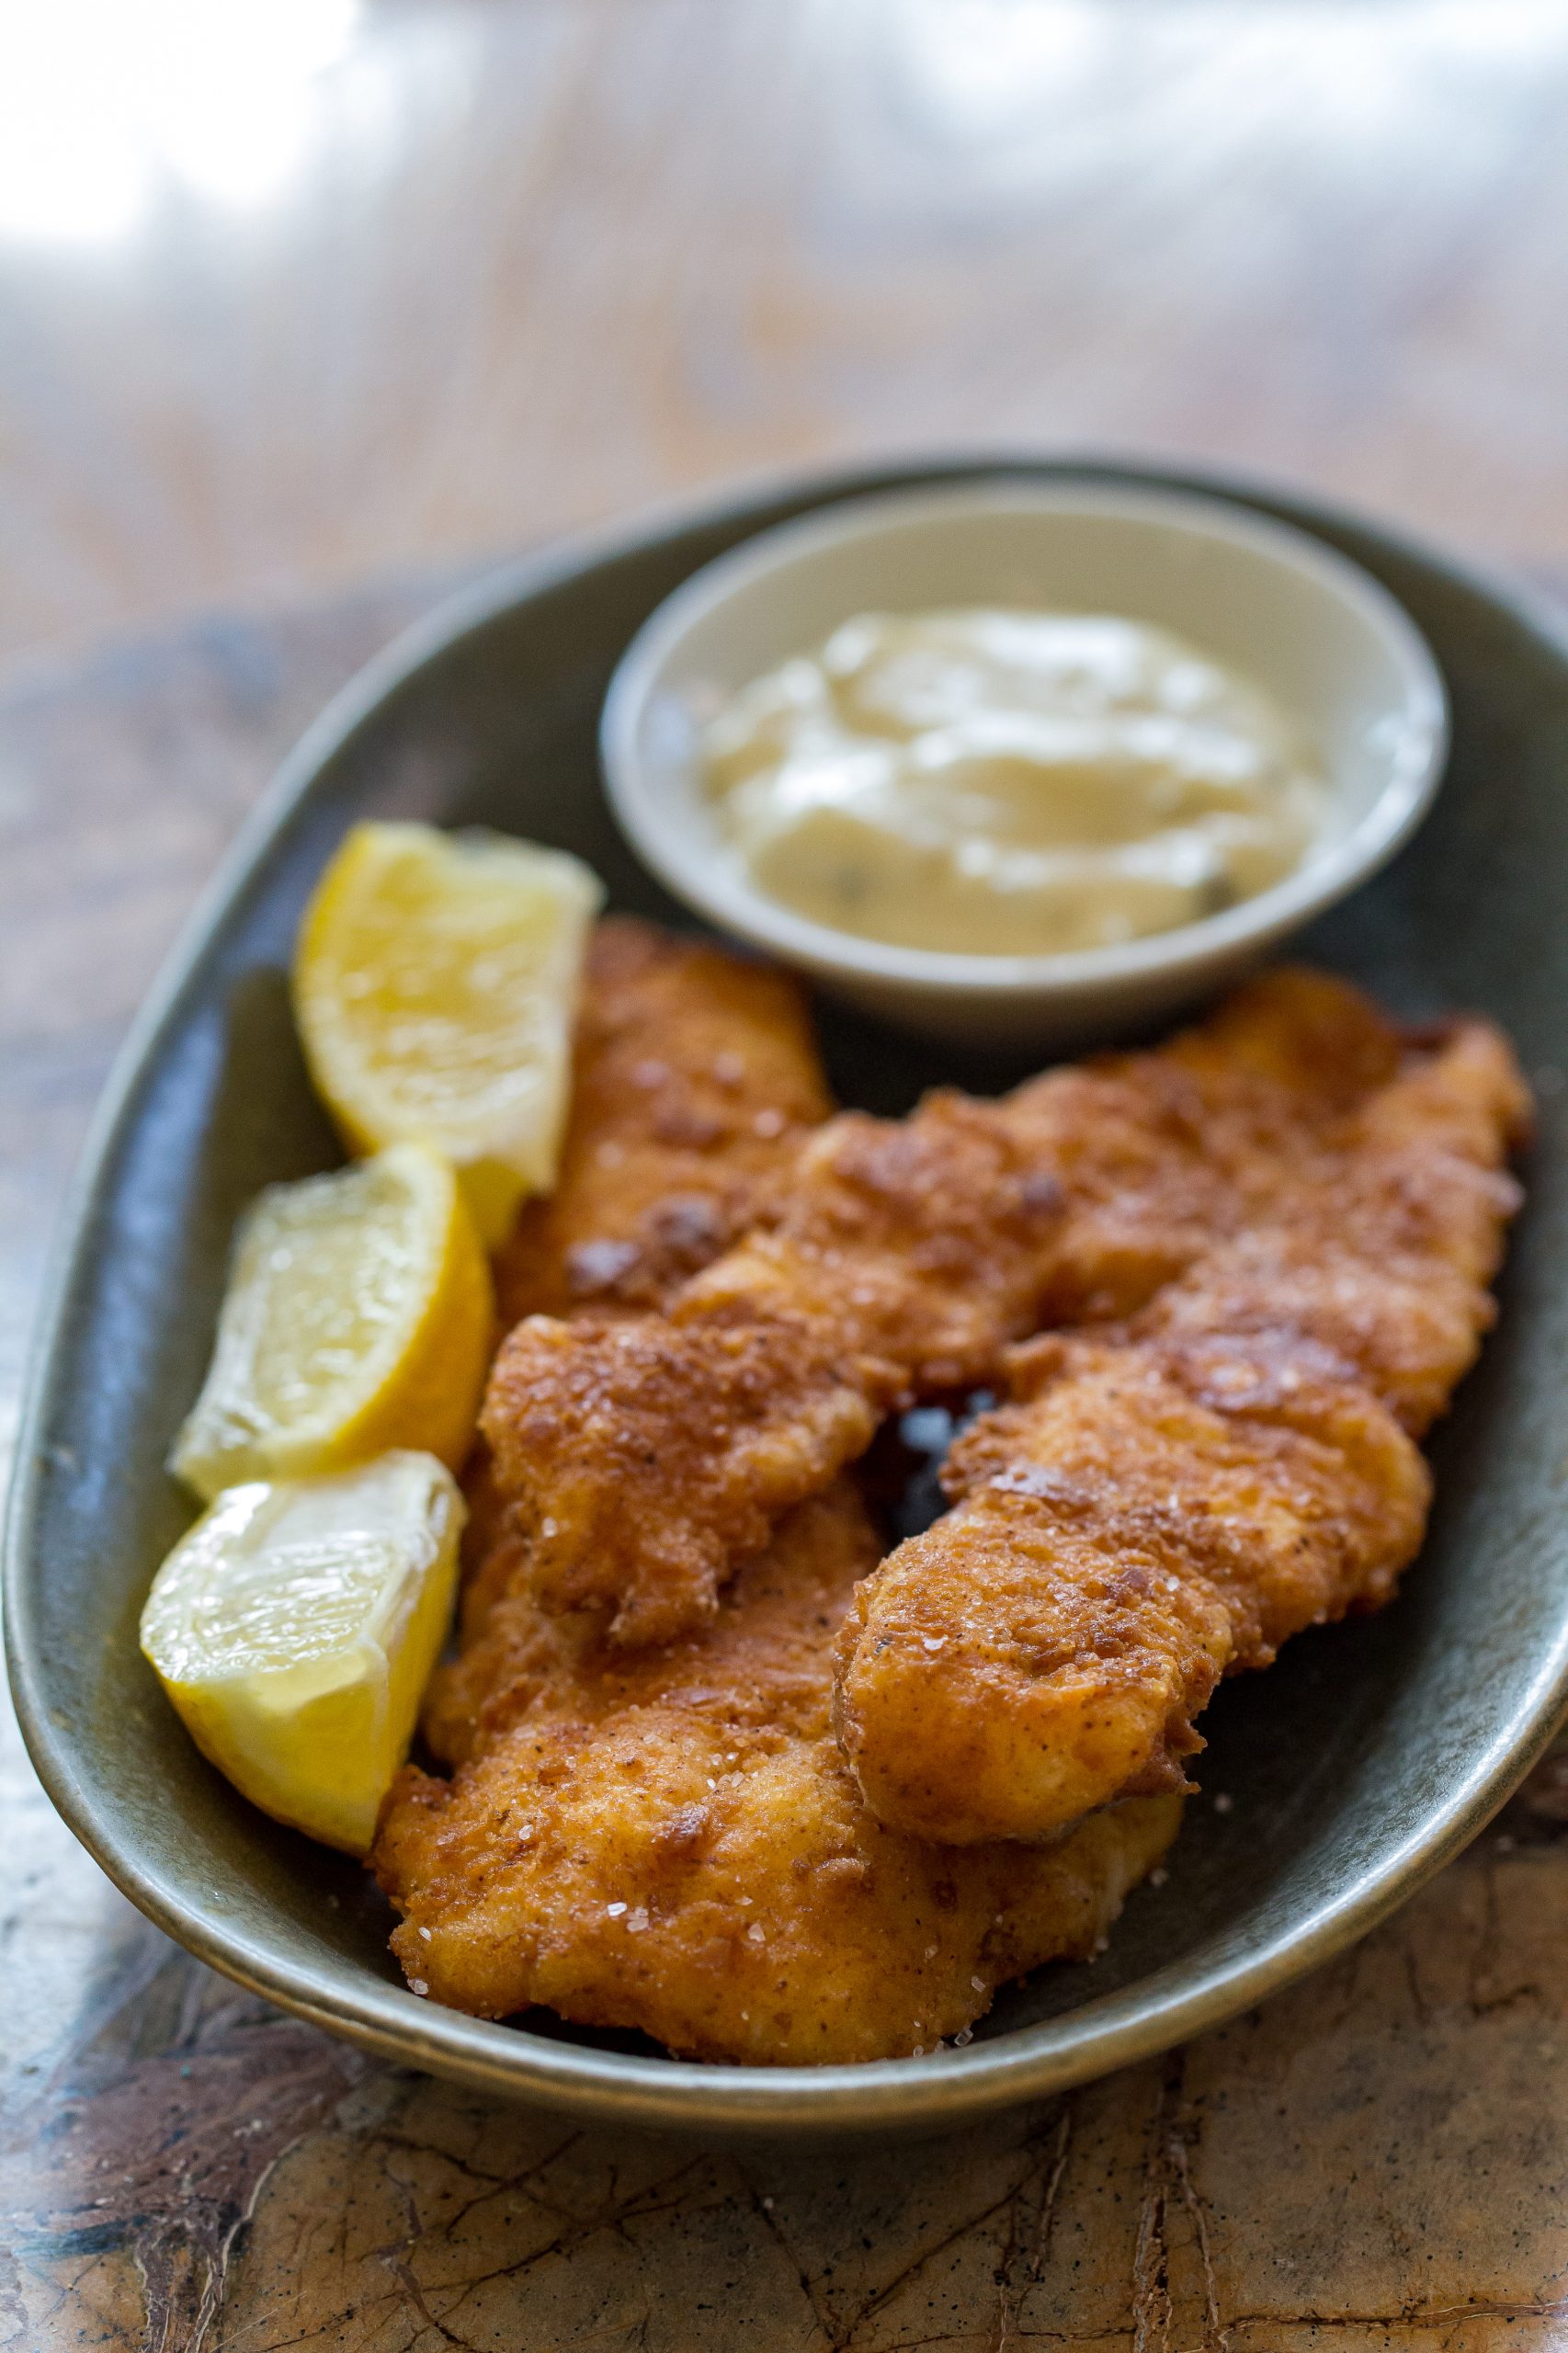 Fried Walleye Recipe - Or Whatever You Do